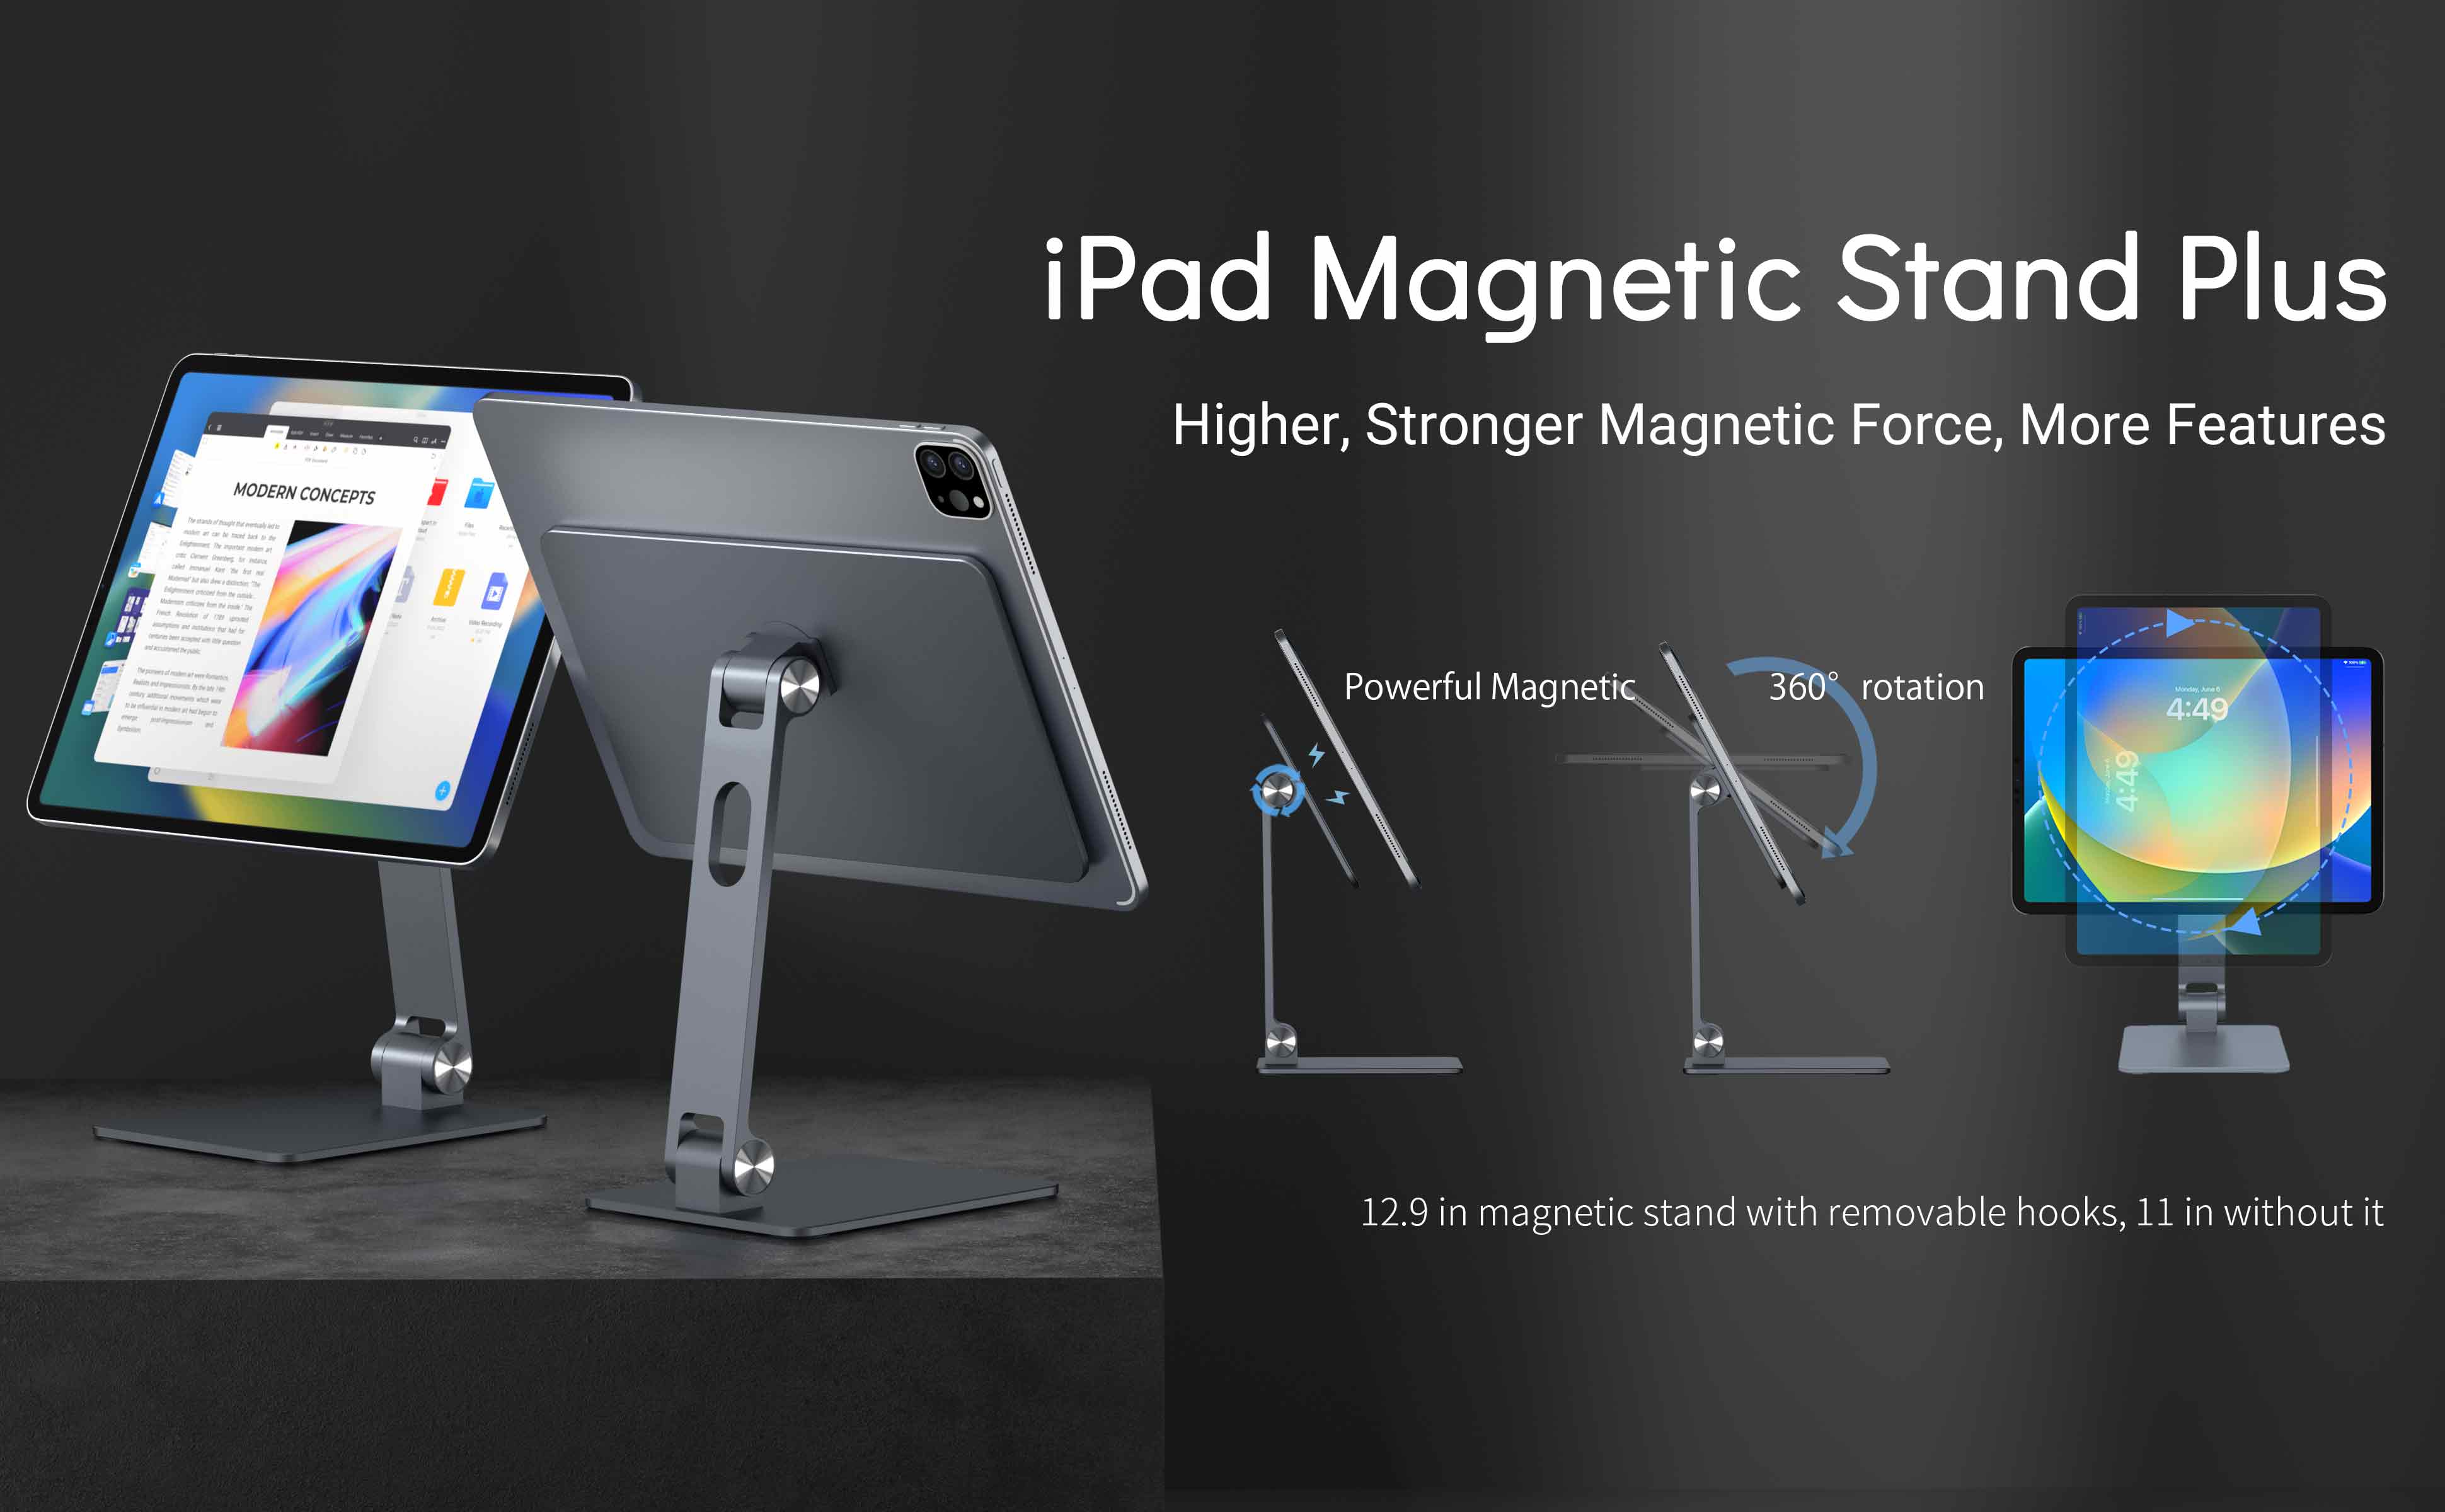 ipad-magnetic-stand-more-perfect-ipad-magnetic-stand-for-your-ipad-proair5-air4-magfit-ipad-magnetic-stand-plus